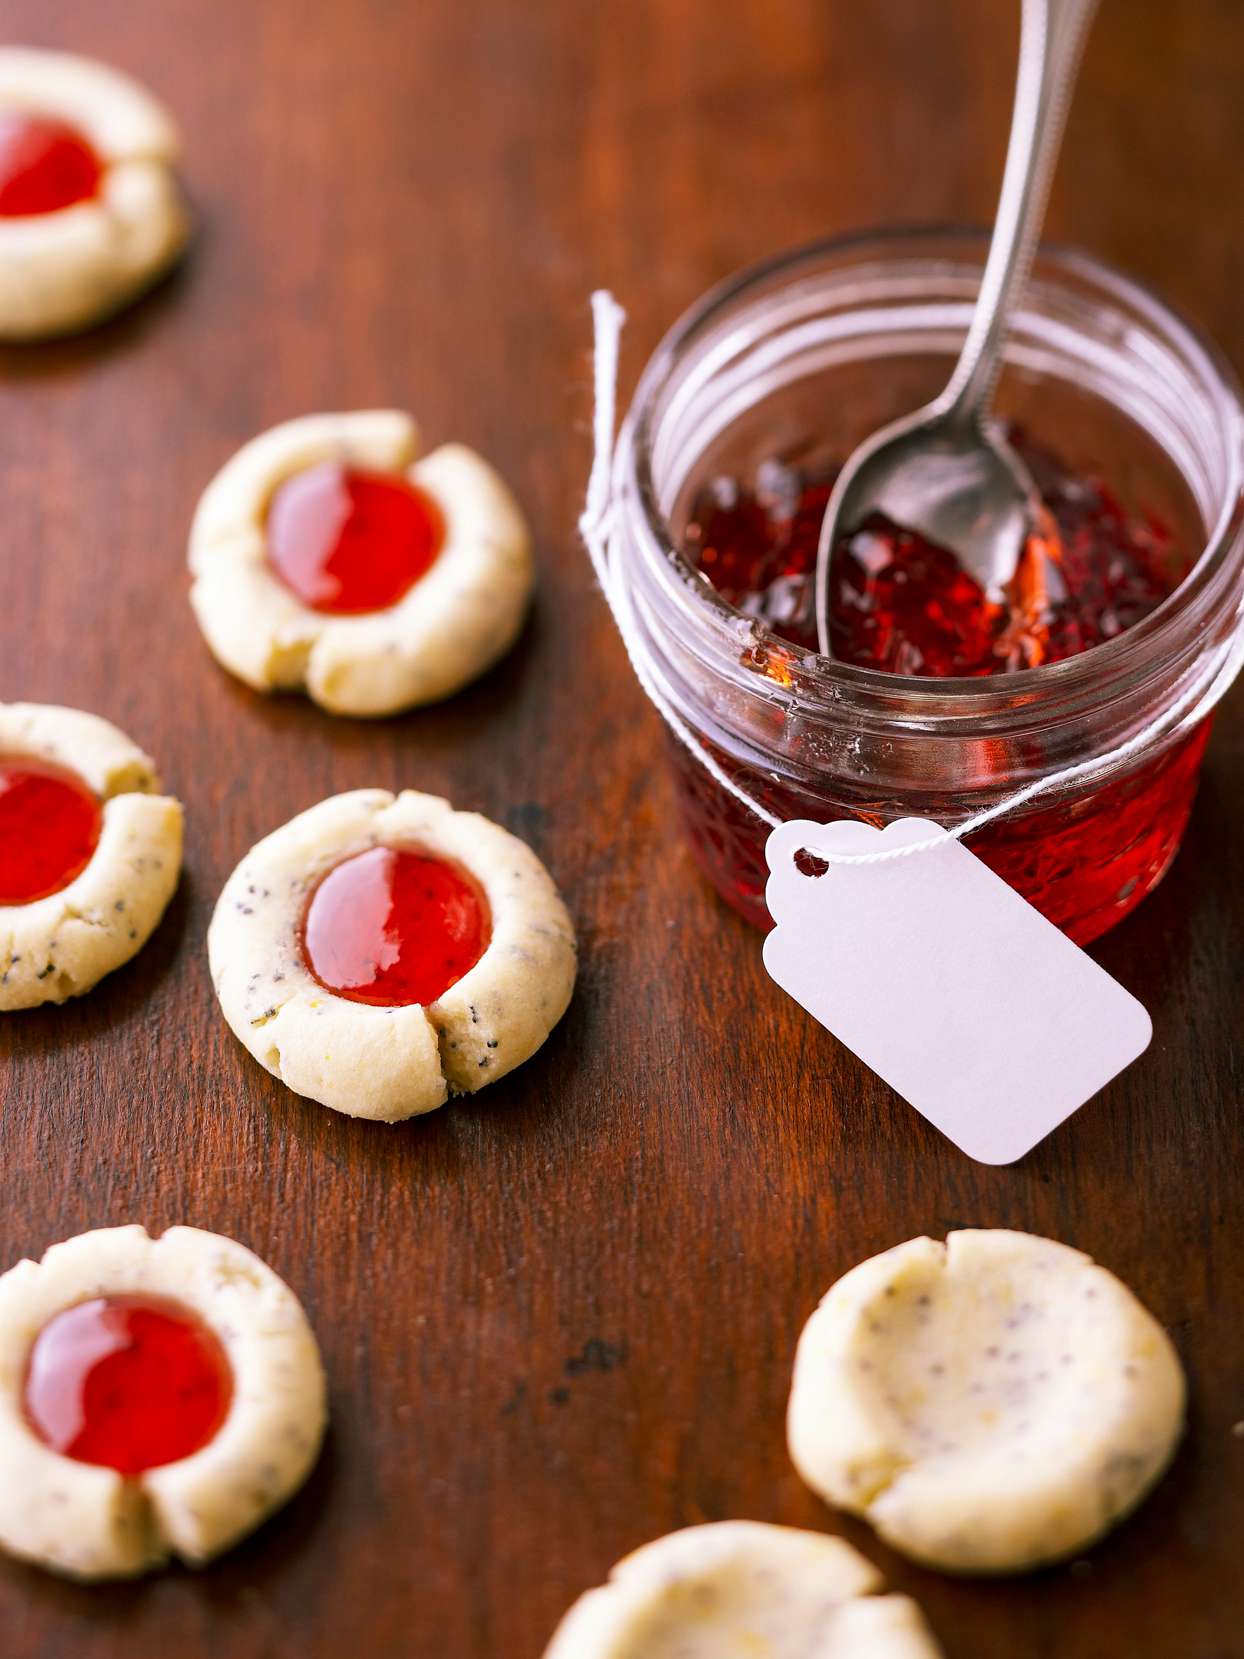 Red Currant-Poppyseed Thumbprints